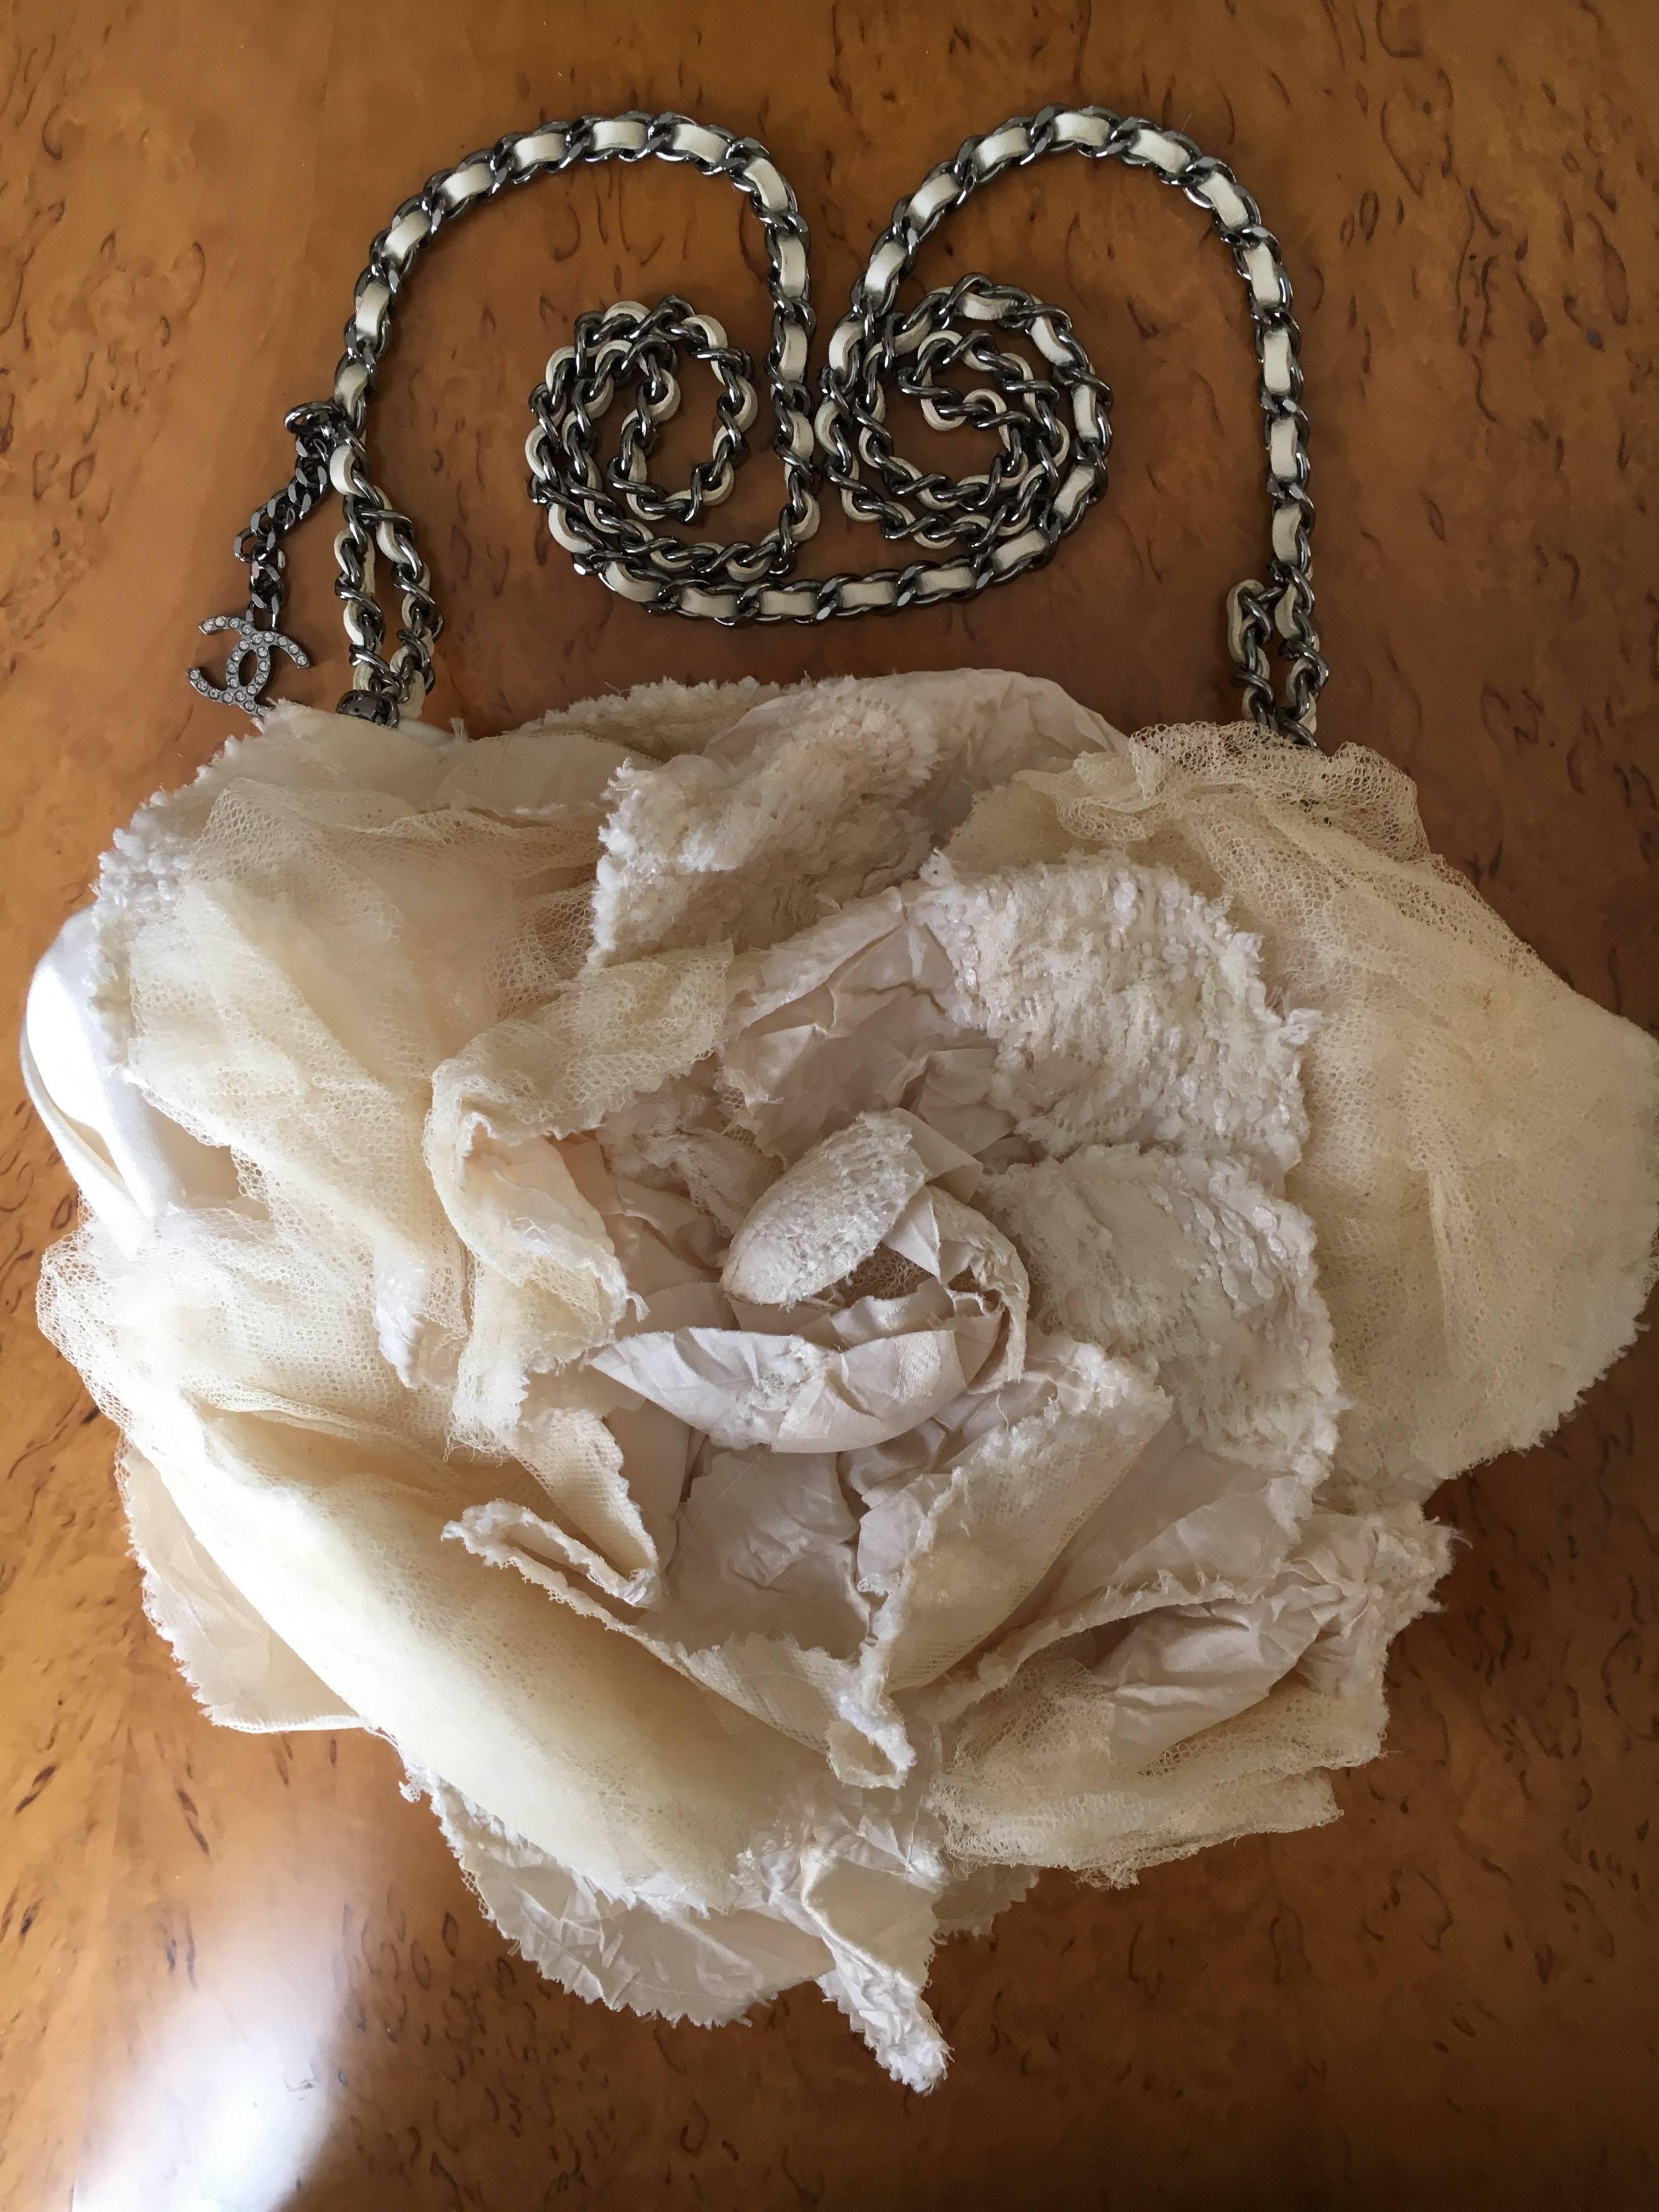 Rare soft Camellia flower clutch hand bag from Chanel.
There is a silver tone chain strap laced with white leather.
Appx 8